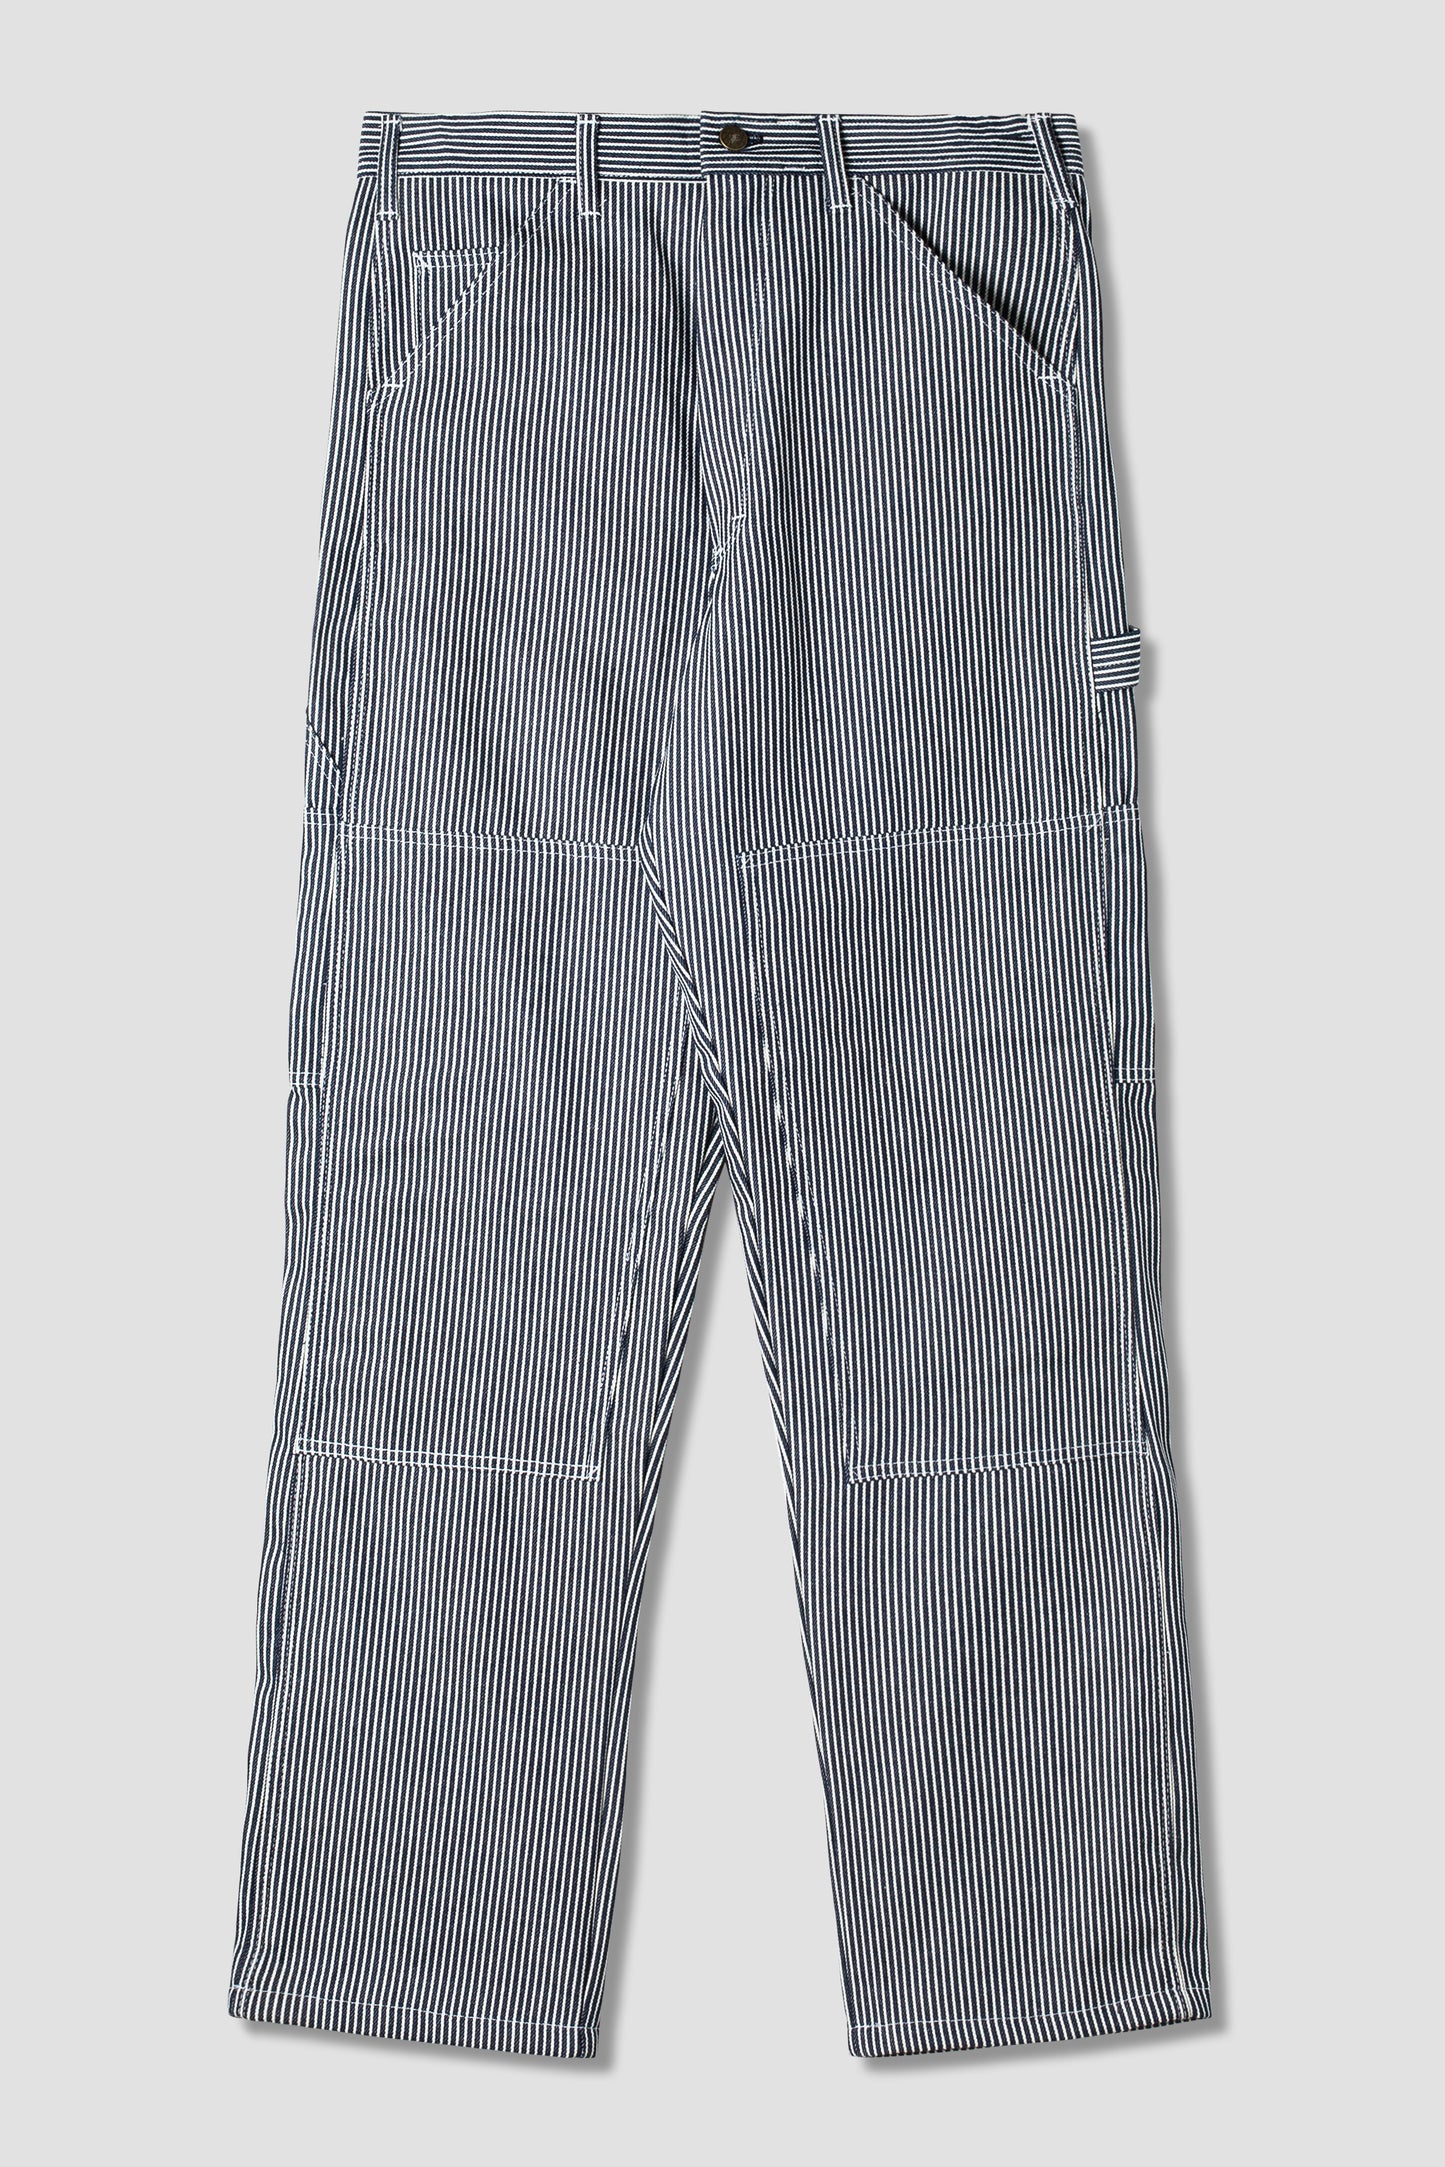 Double Knee Painter Pant (Hickory Stripe)